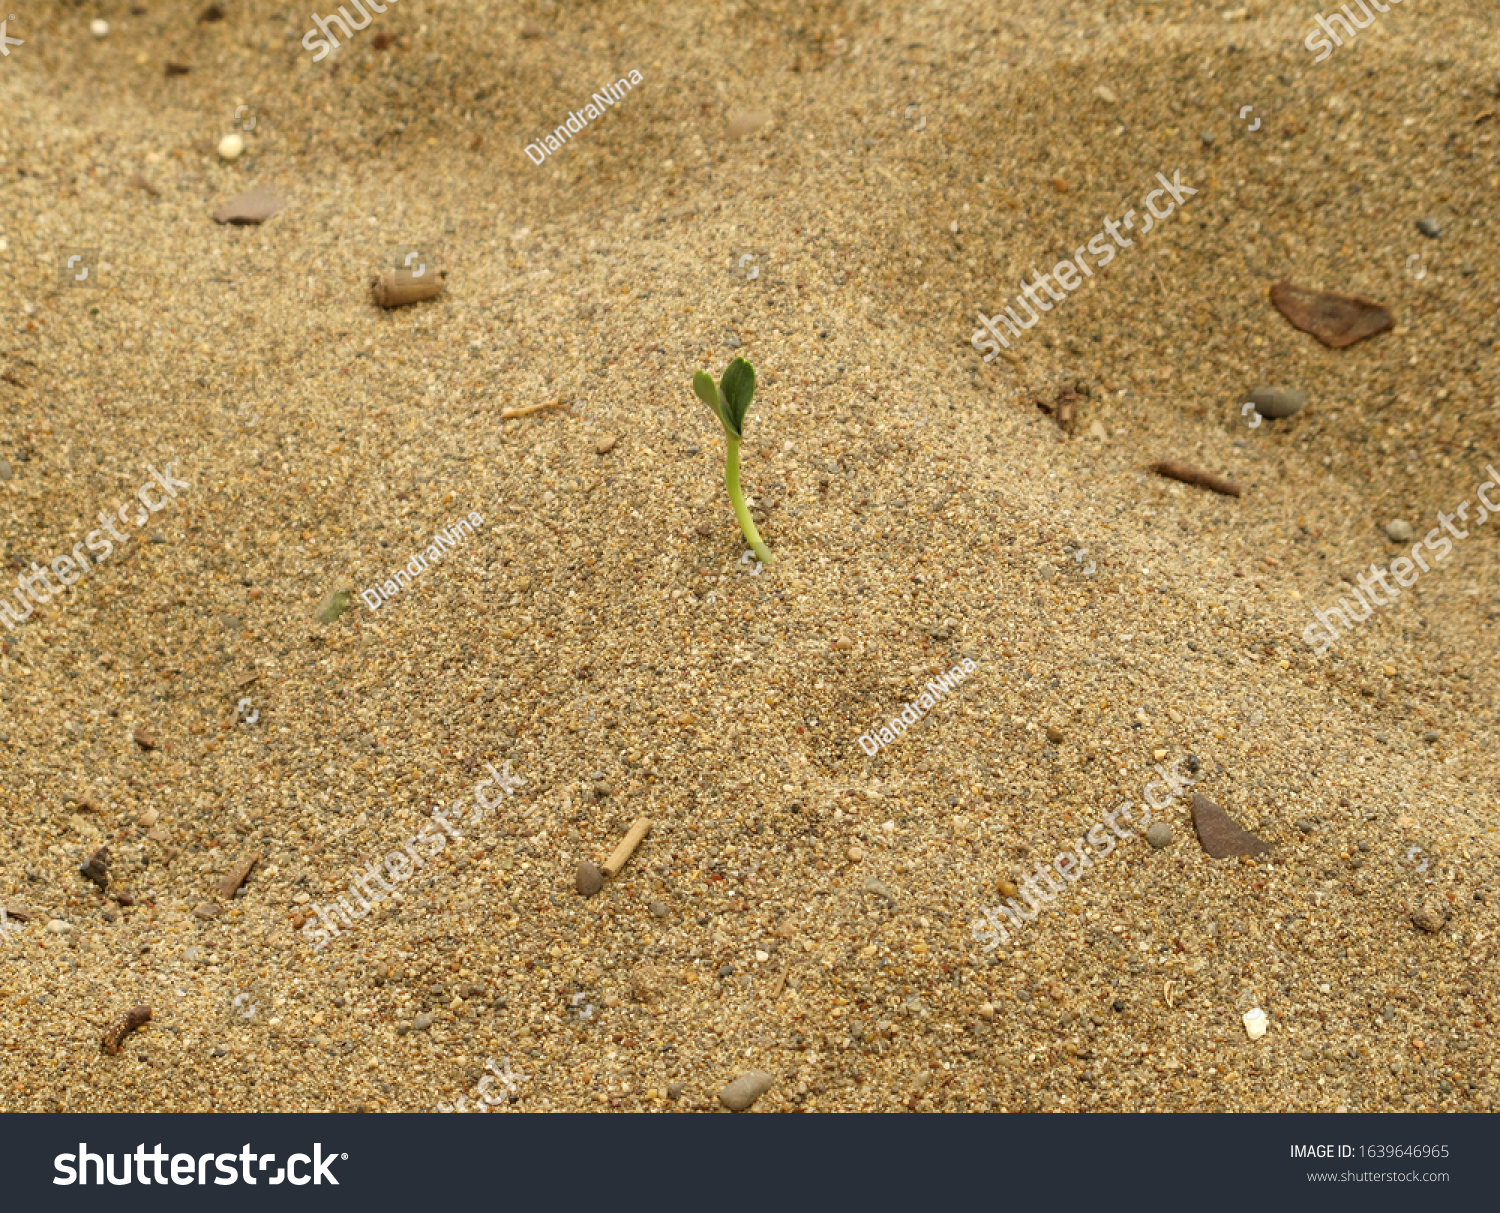 Small green sprout growing in the sand under the hot sun. Courage, fortitude and vitality #1639646965